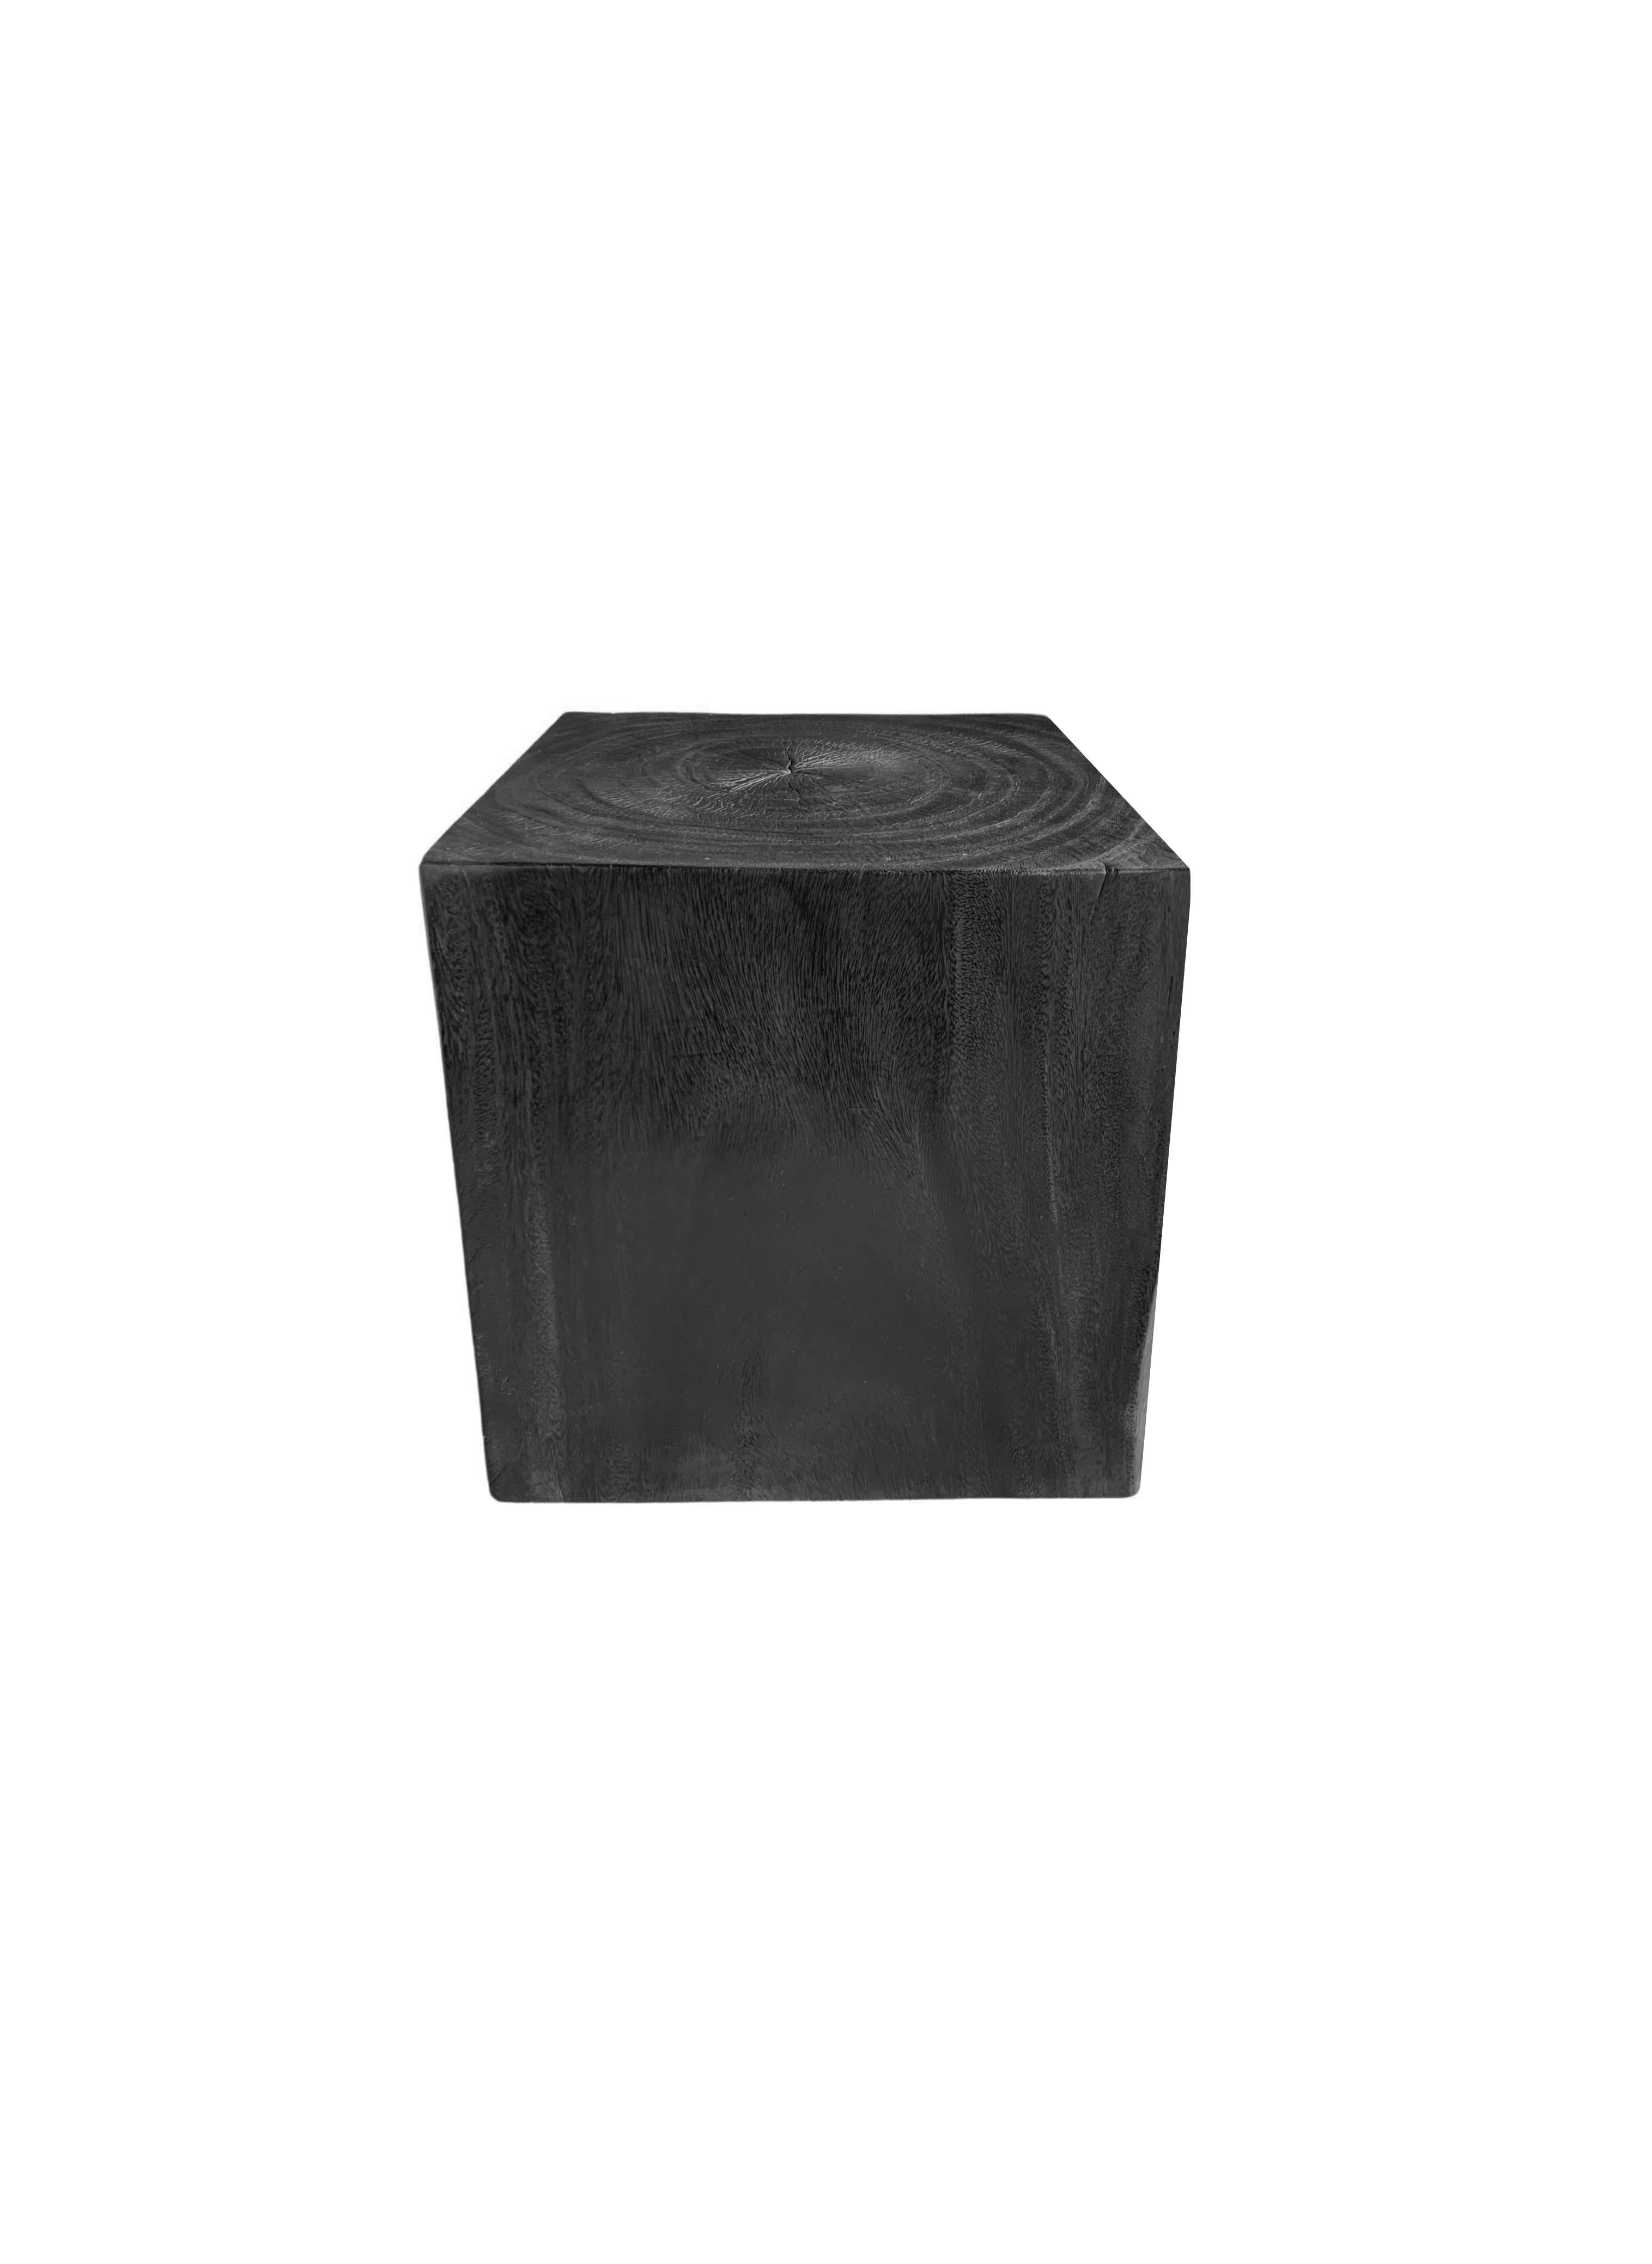 Hand-Crafted Mango Wood Pedestal or Side Table Burnt Finish For Sale